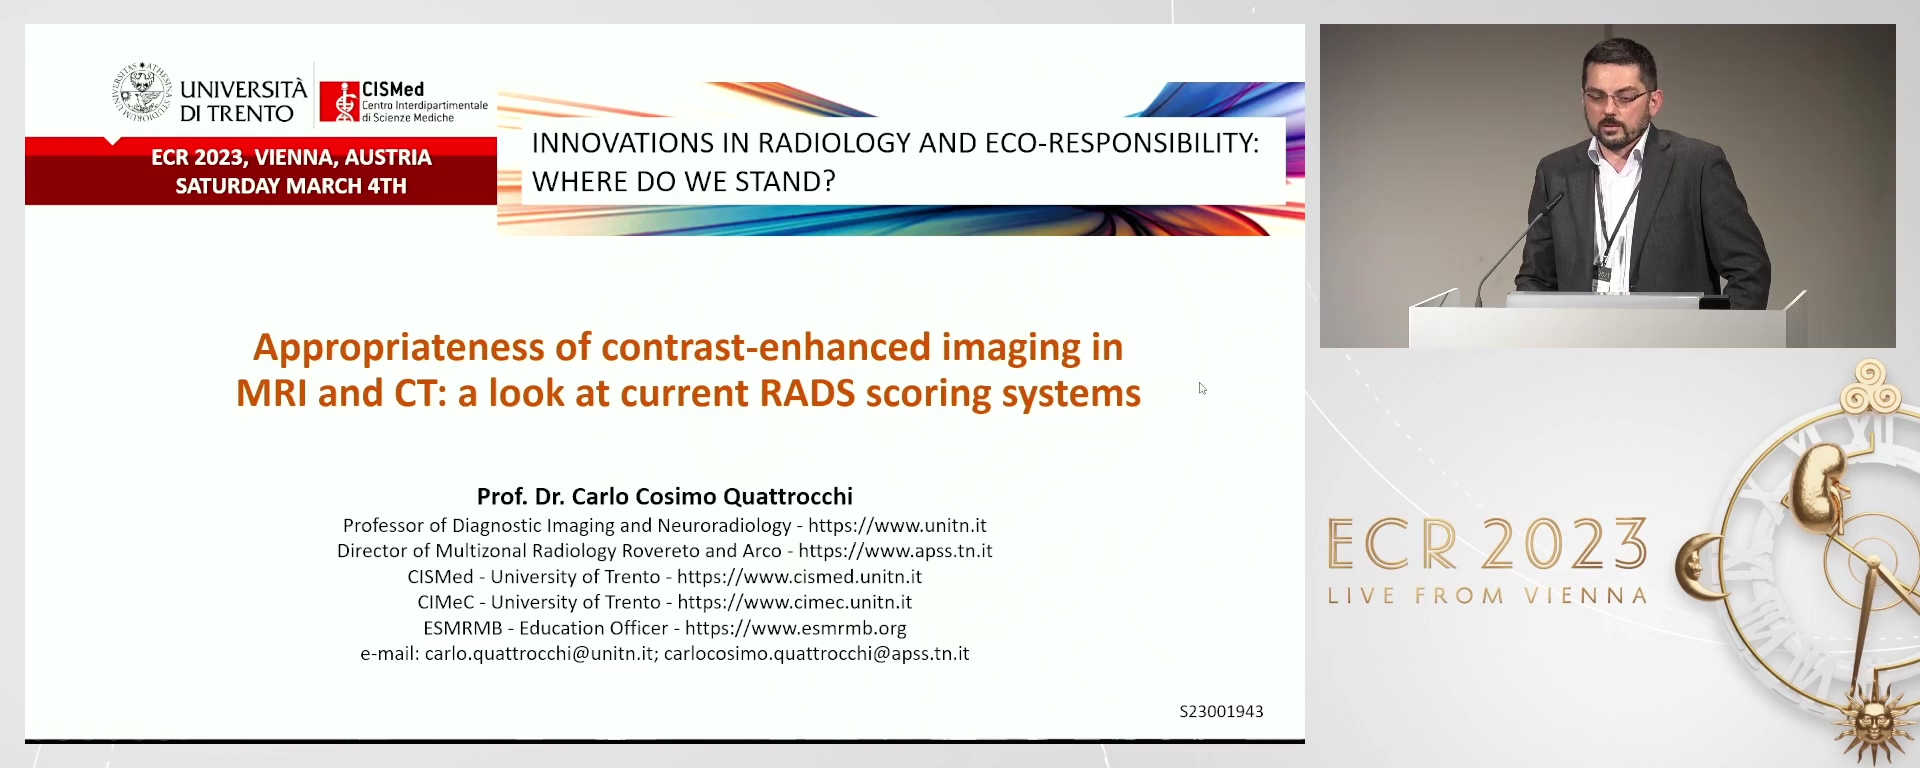 Appropriateness of contrast-enhanced imaging in MRI and CT: a look at current RADS scoring systems